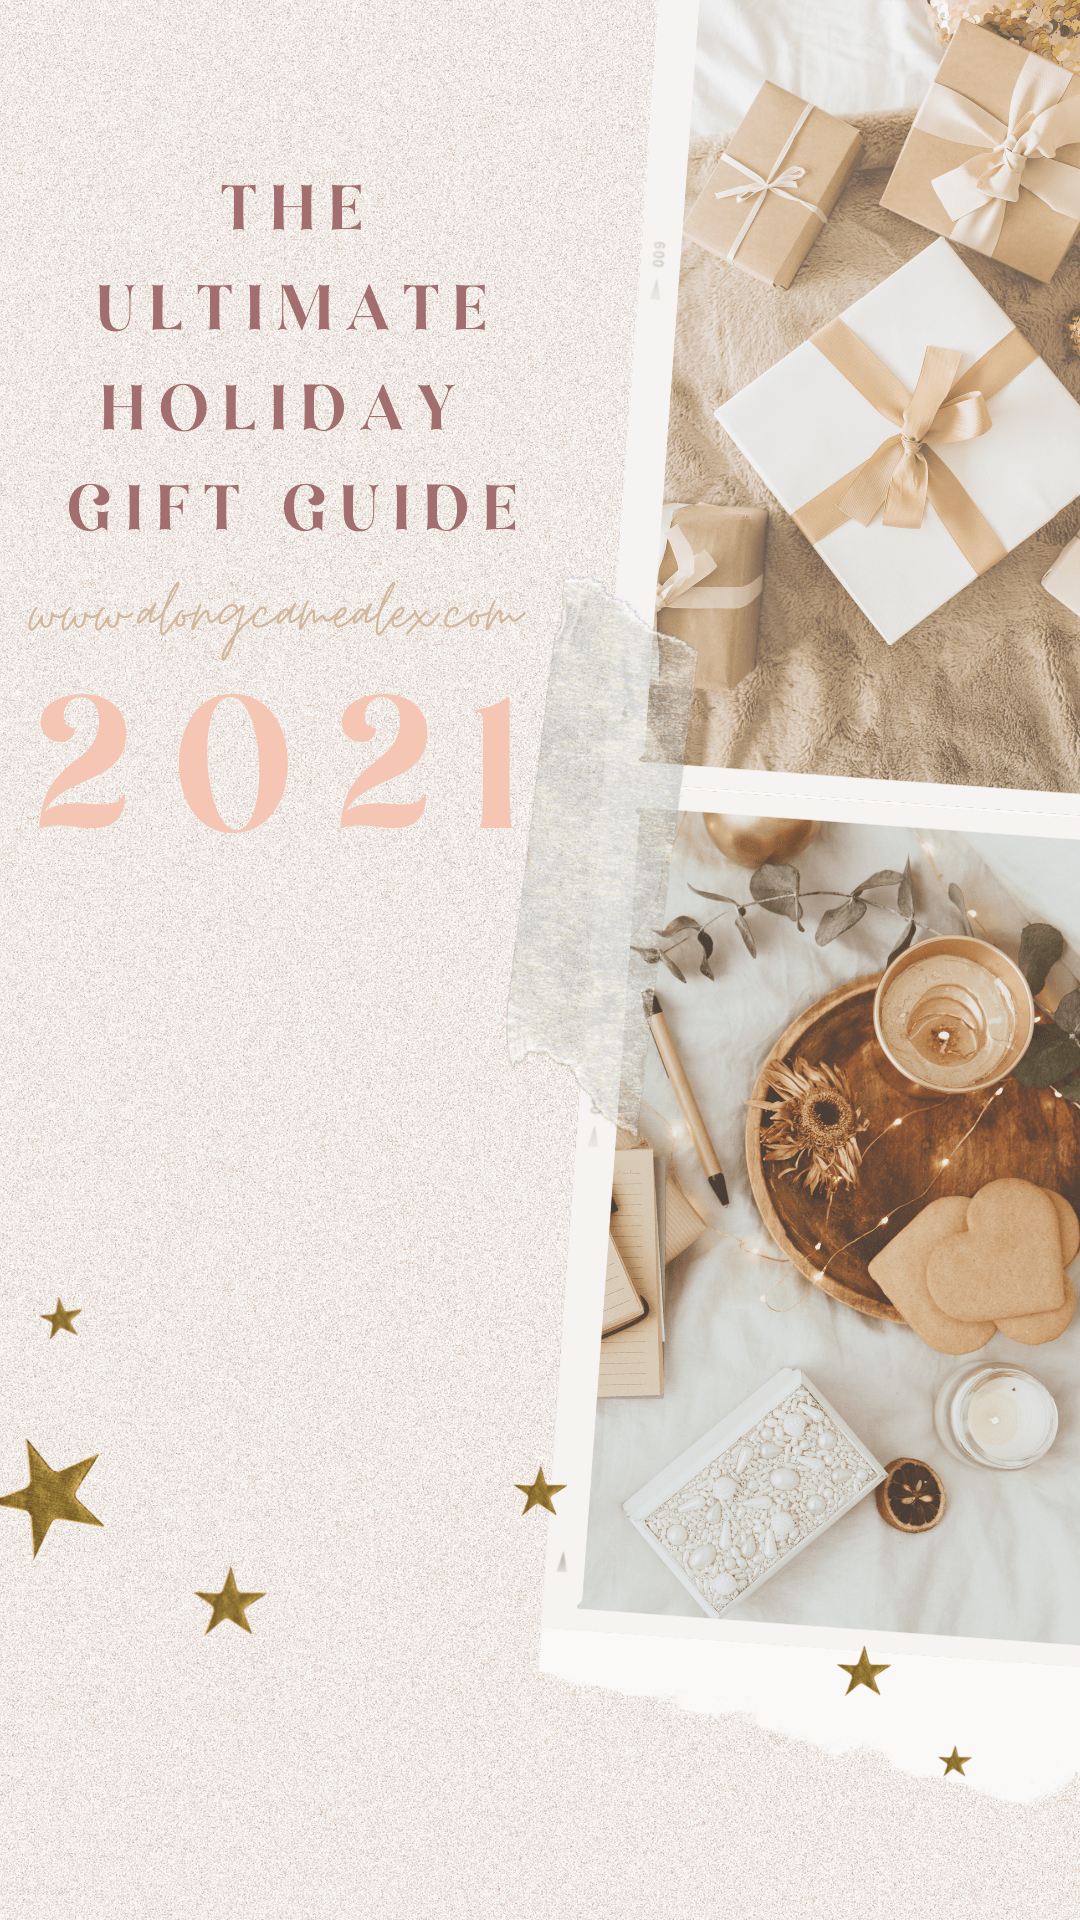 THE ULTIMATE 2021 HOLIDAY GIFT GUIDE